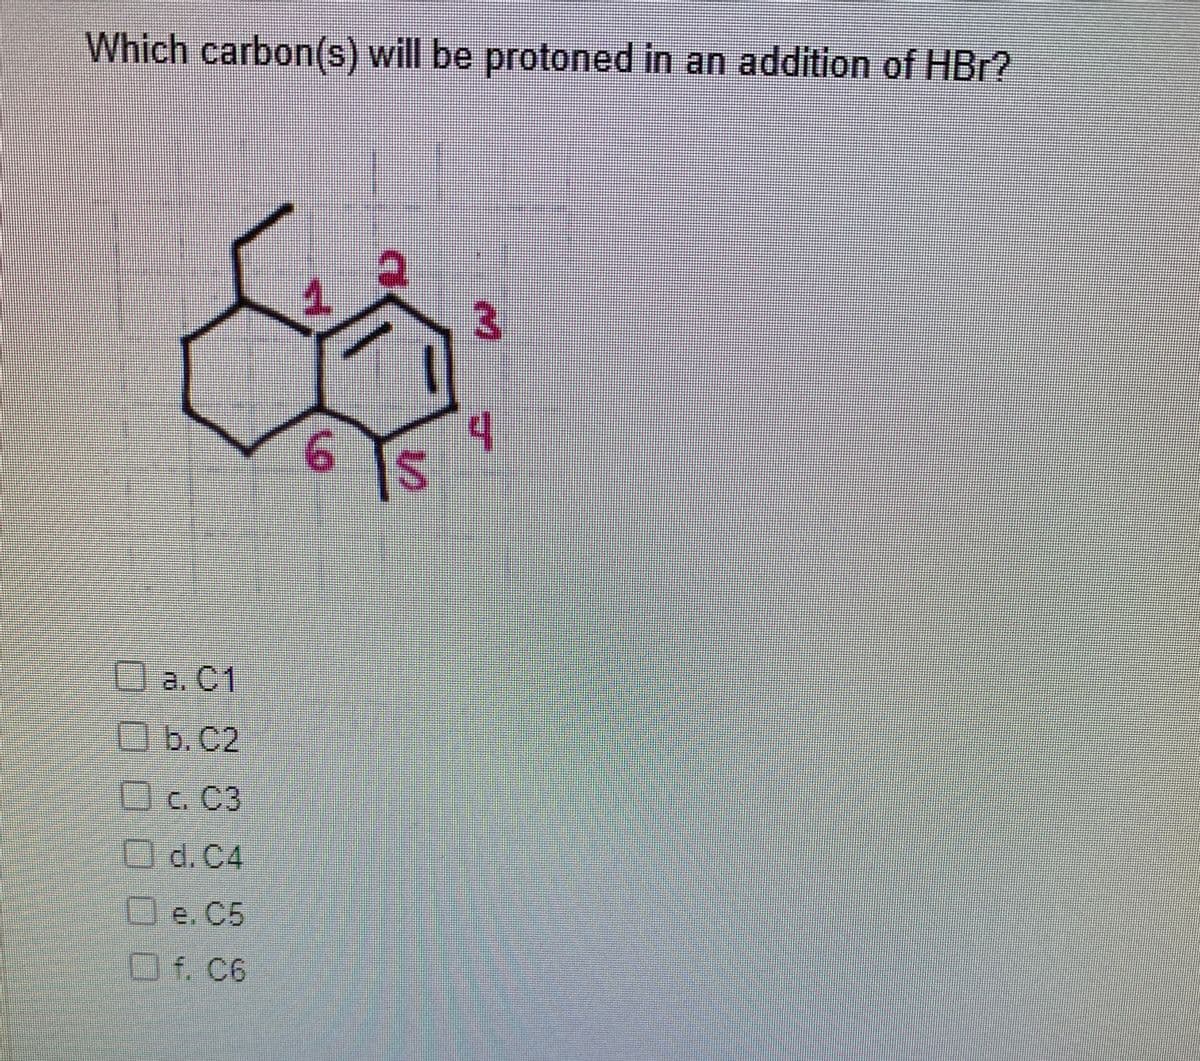 Which carbon(s) will be protoned in an addition of HBr?
3.
Oa. C1
Ob.c2
b.C2
O
c. C3
O
d. C4
O e. C5
口f. C6
.000
